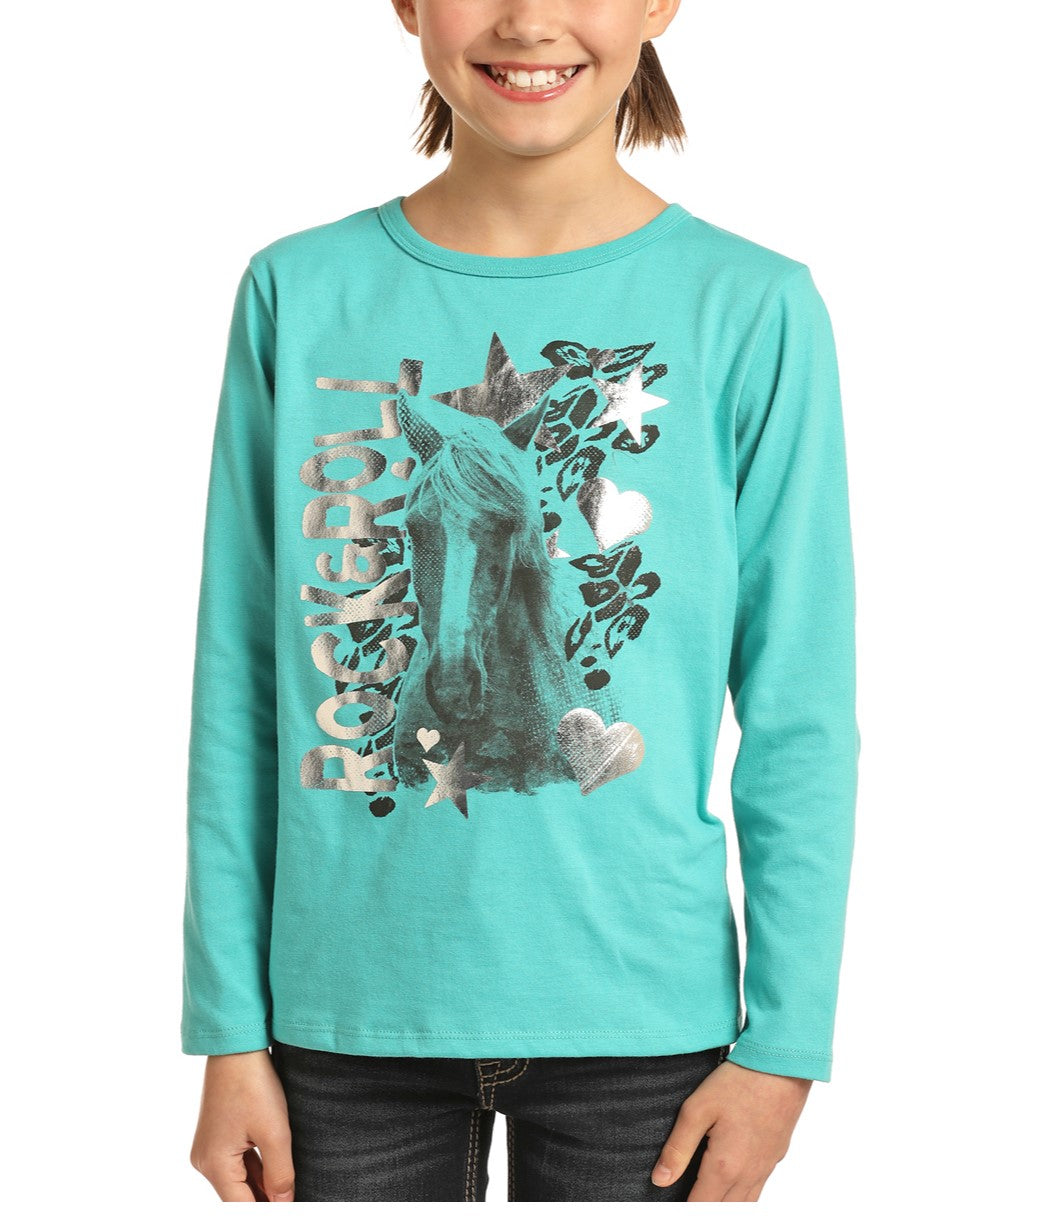 Rock & Roll Cowgirl Girls Horse Graphic Long Sleeve Teal T-Shirt G4T3315